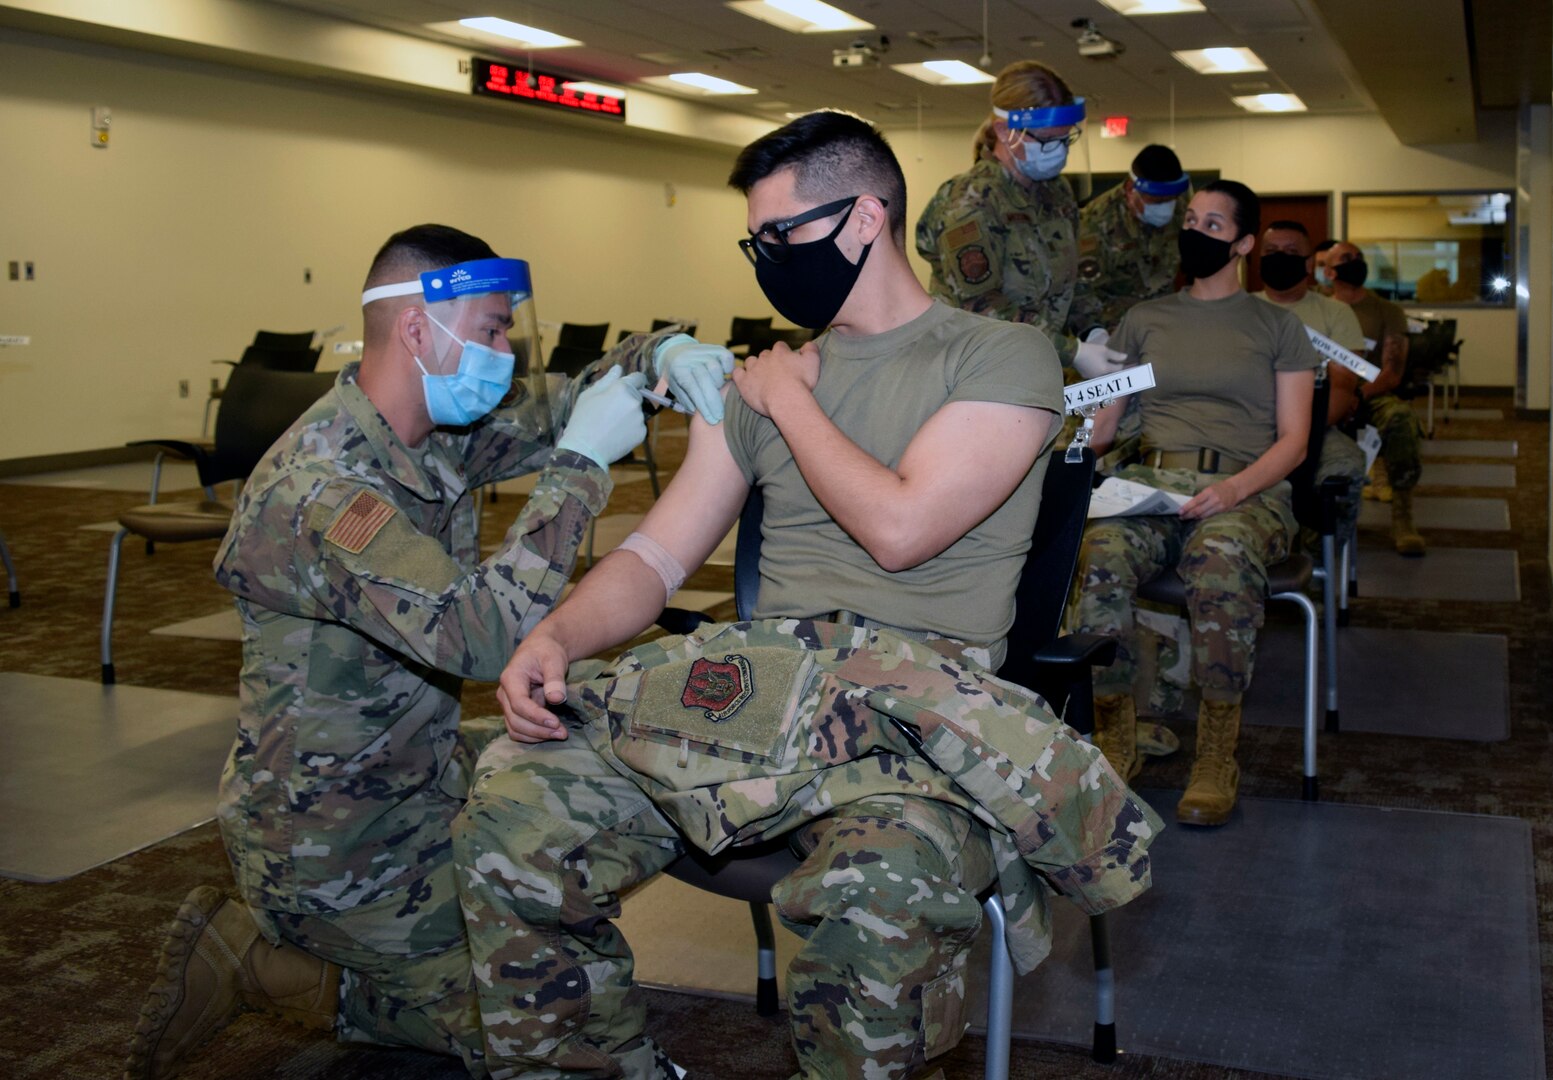 Reserve Citizen Airmen with the 433rd Airlift Wing receive their COVID-19 vaccines, March 6, 2021 at Joint Base San Antonio-Lackland, Texas. The wing had 600 doses available for those wanting to be vaccinated. (U.S. Air Force photo by Senior Airman Brittany Wich)